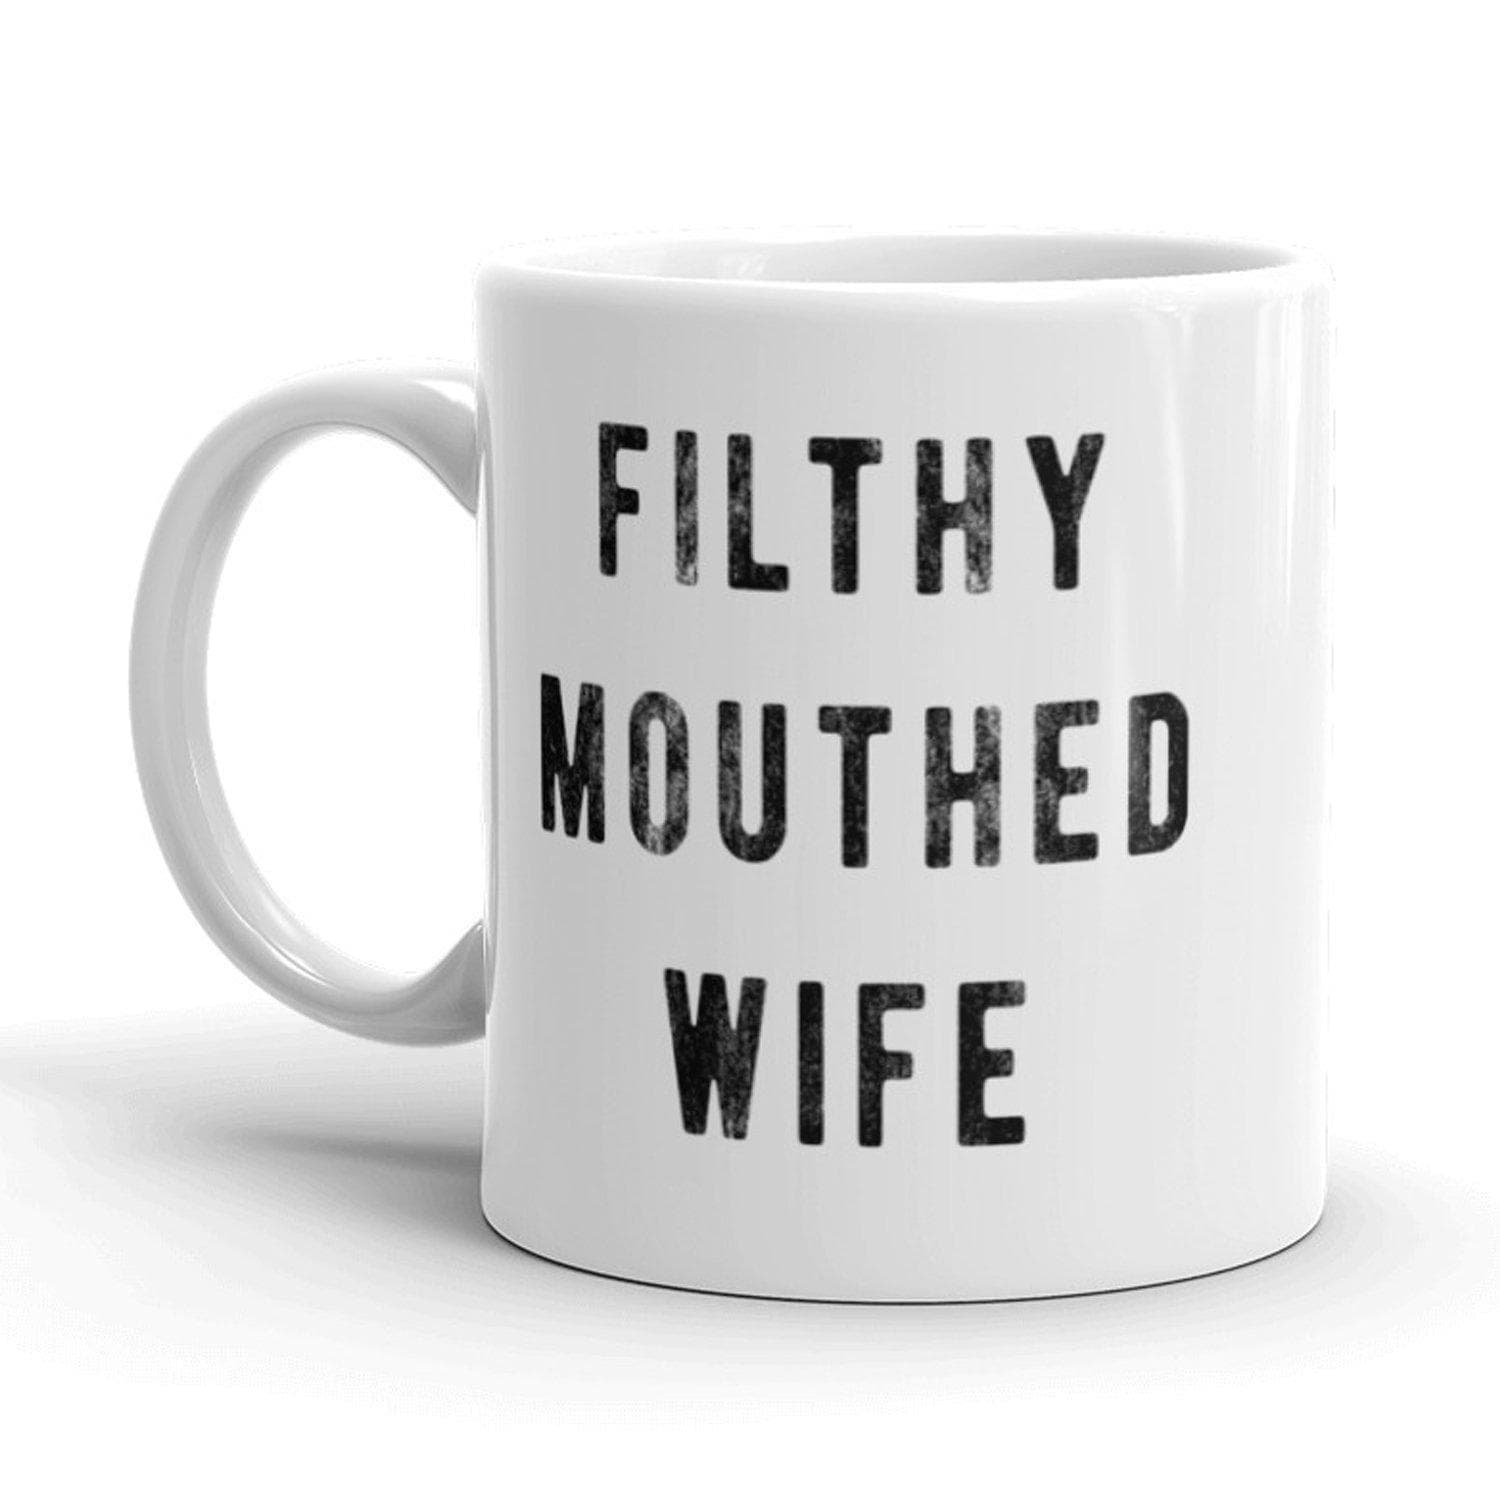 Filthy Mouthed Wife Mug - Crazy Dog T-Shirts